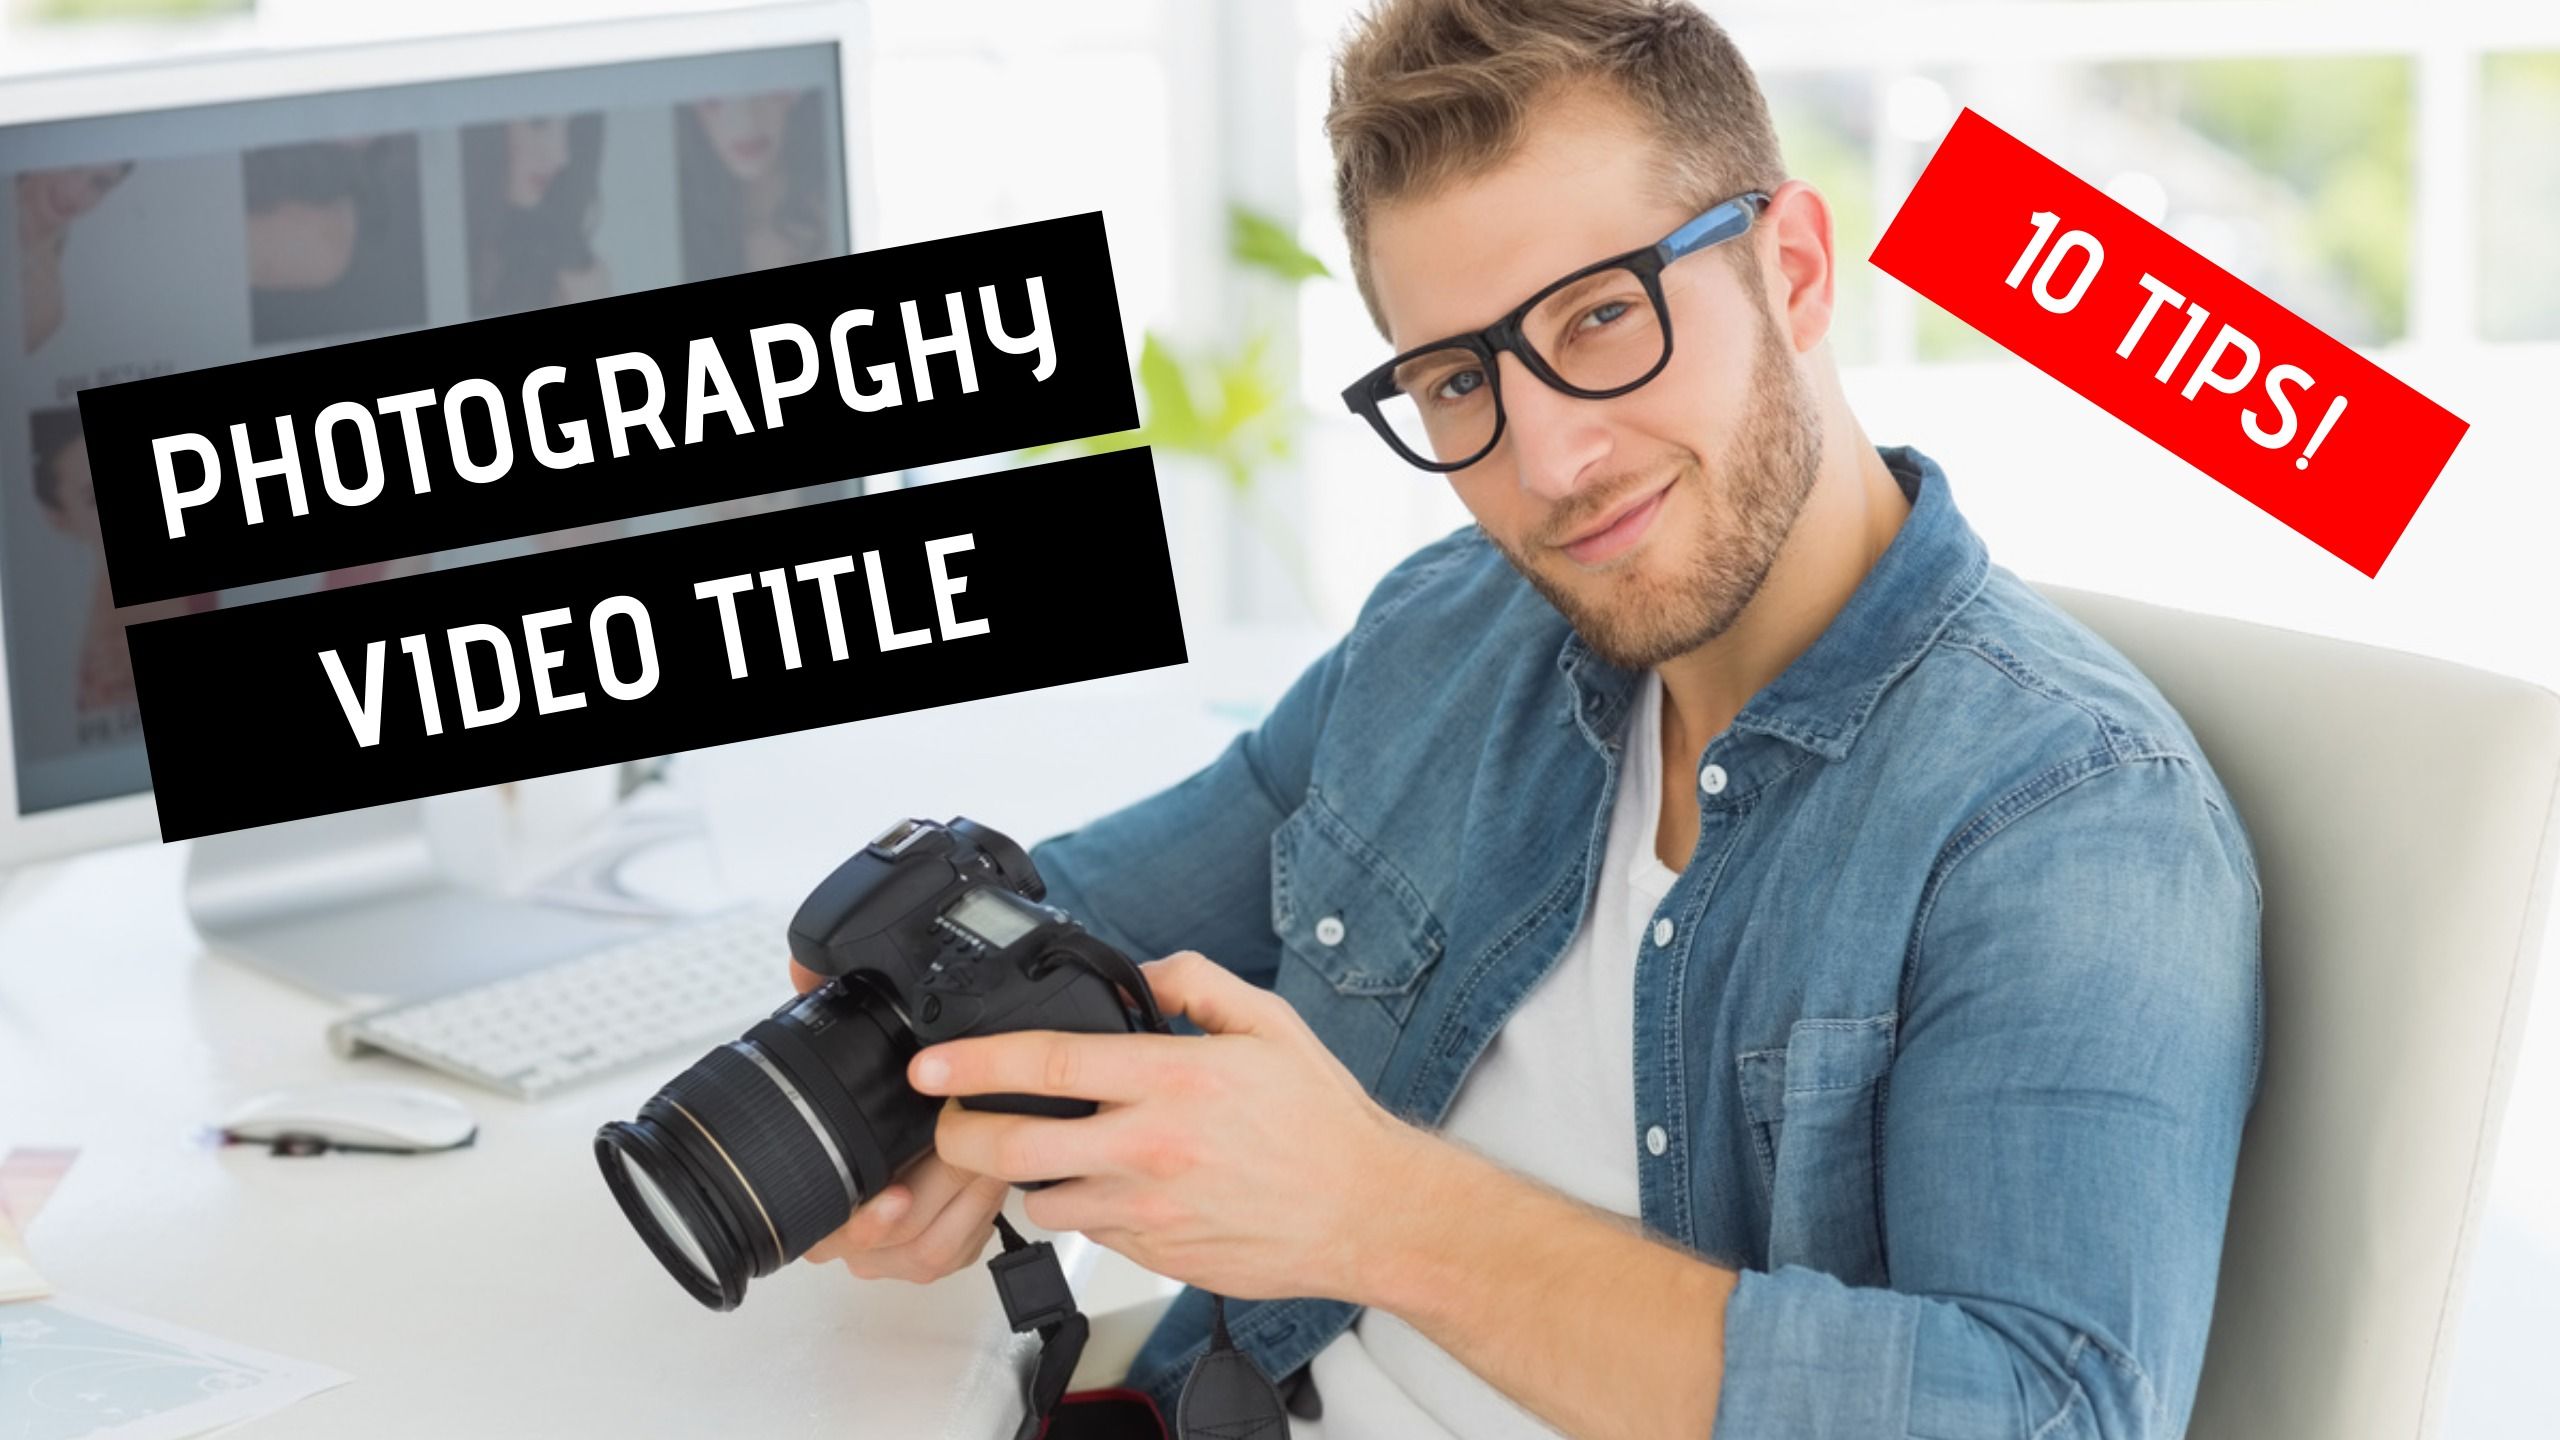 Video thumbnail template about photography - Step-by-step guide to designing YouTube thumbnails - Image